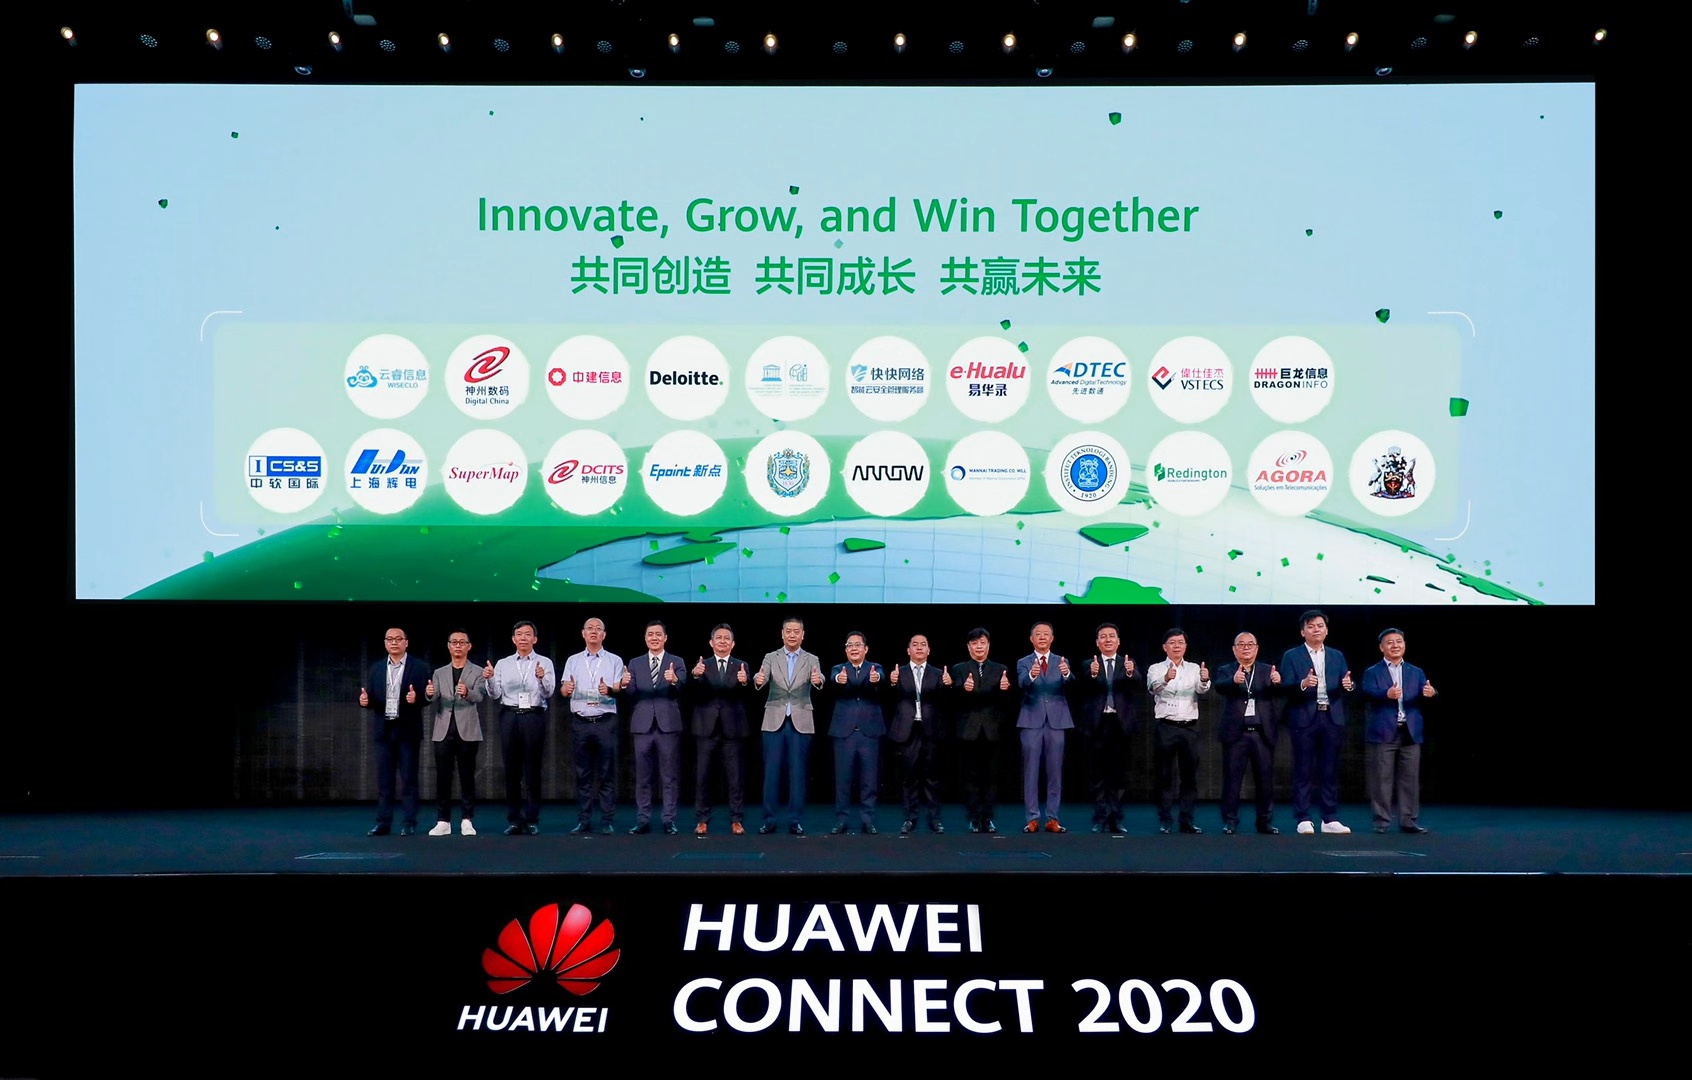 A group of top Huawei executives on stage giving the thumbs up at HUAWEI CONNECT 2020